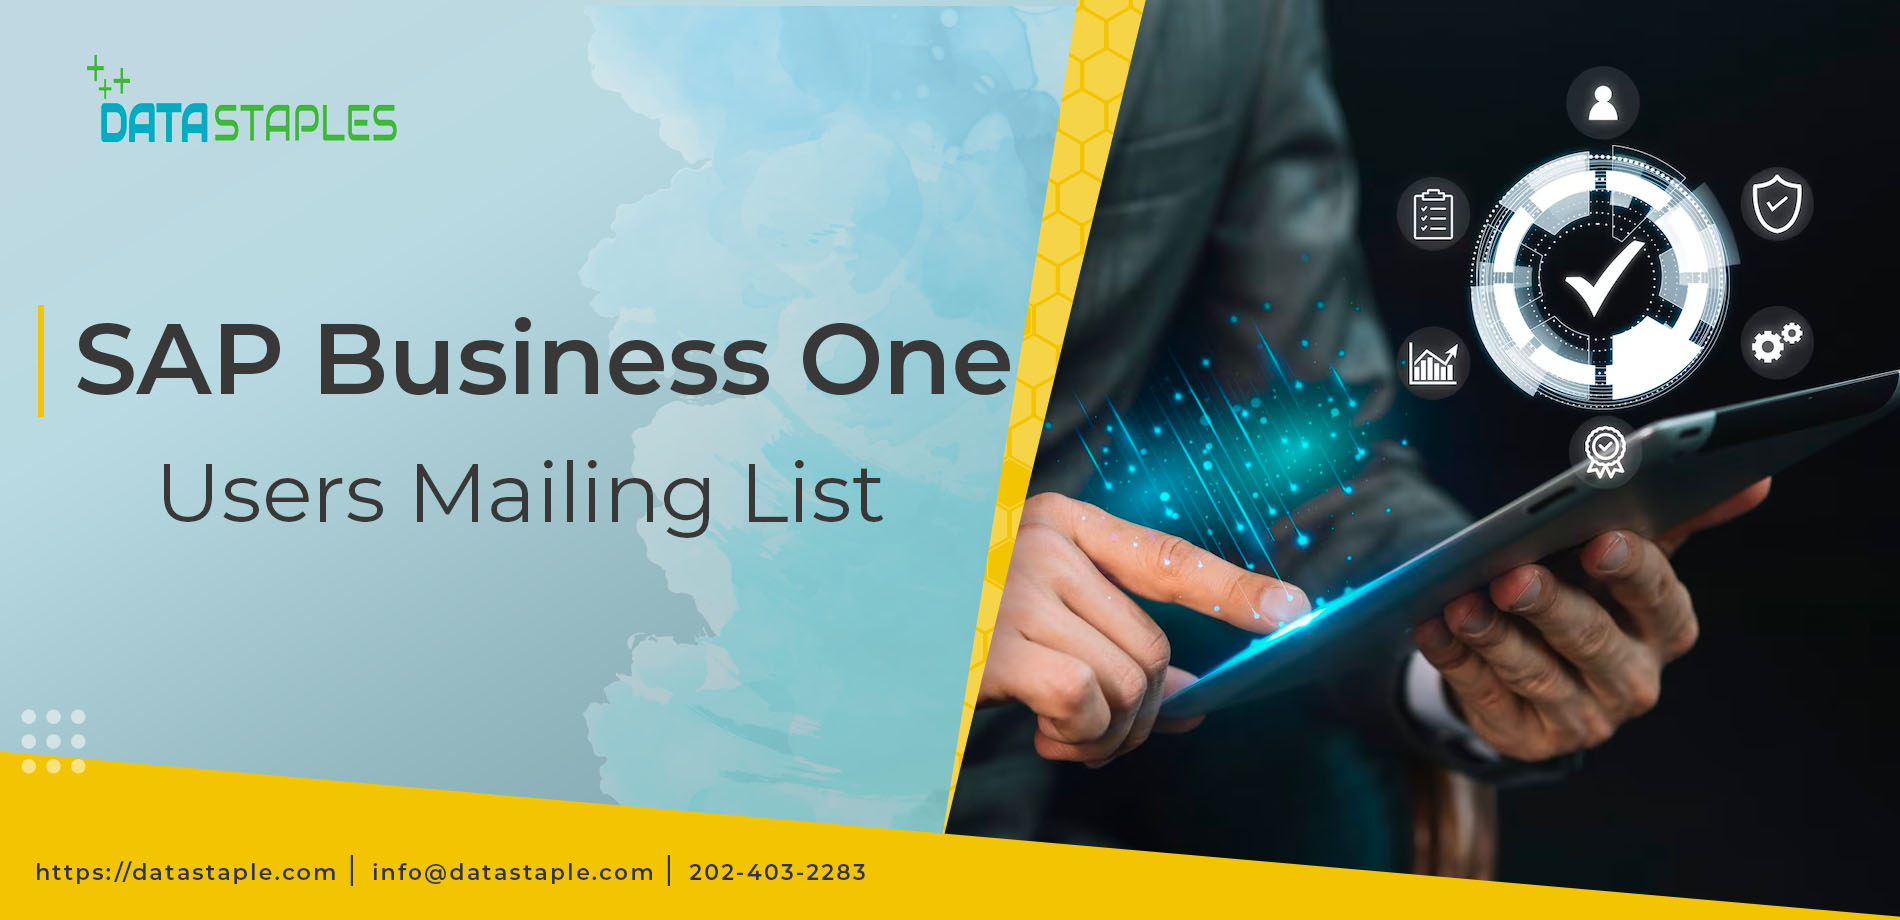 SAP Business One Users Mailing List | DataStaples